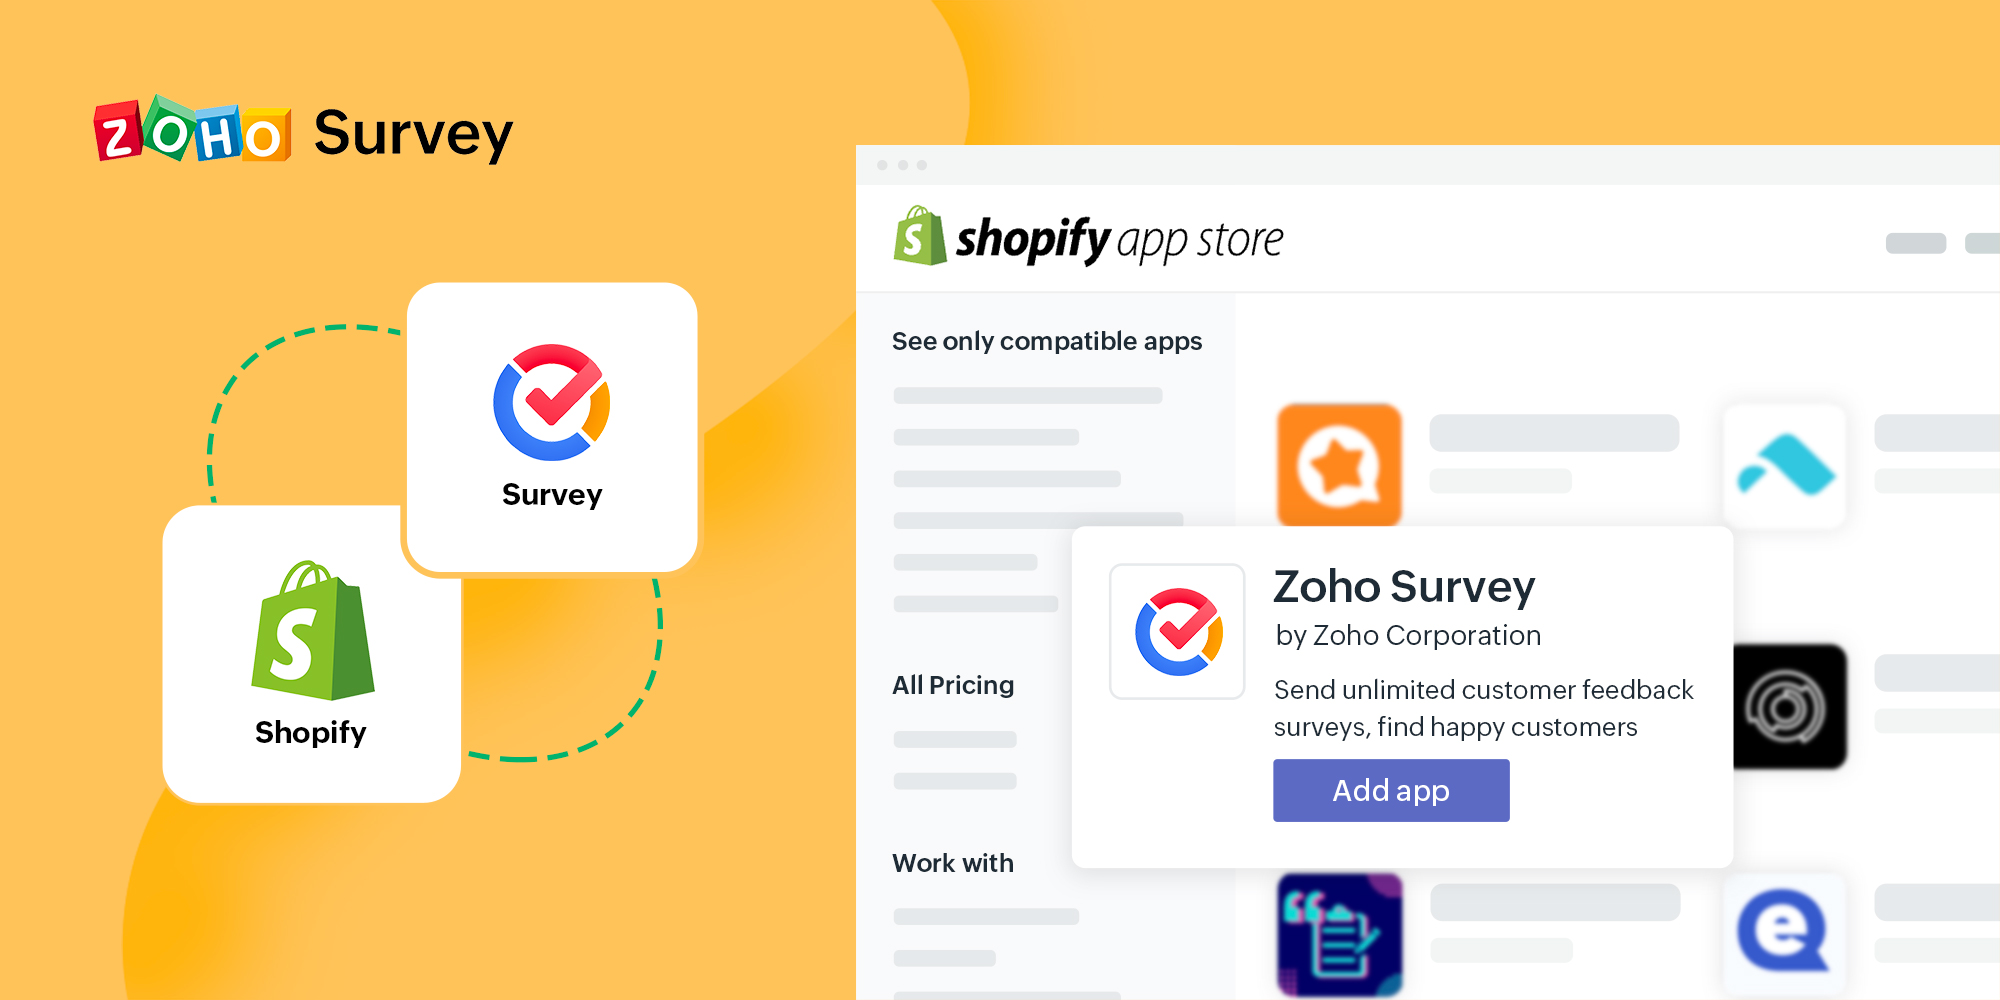 Zoho Survey + Shopify Integration: A step closer to being a customer-centric business